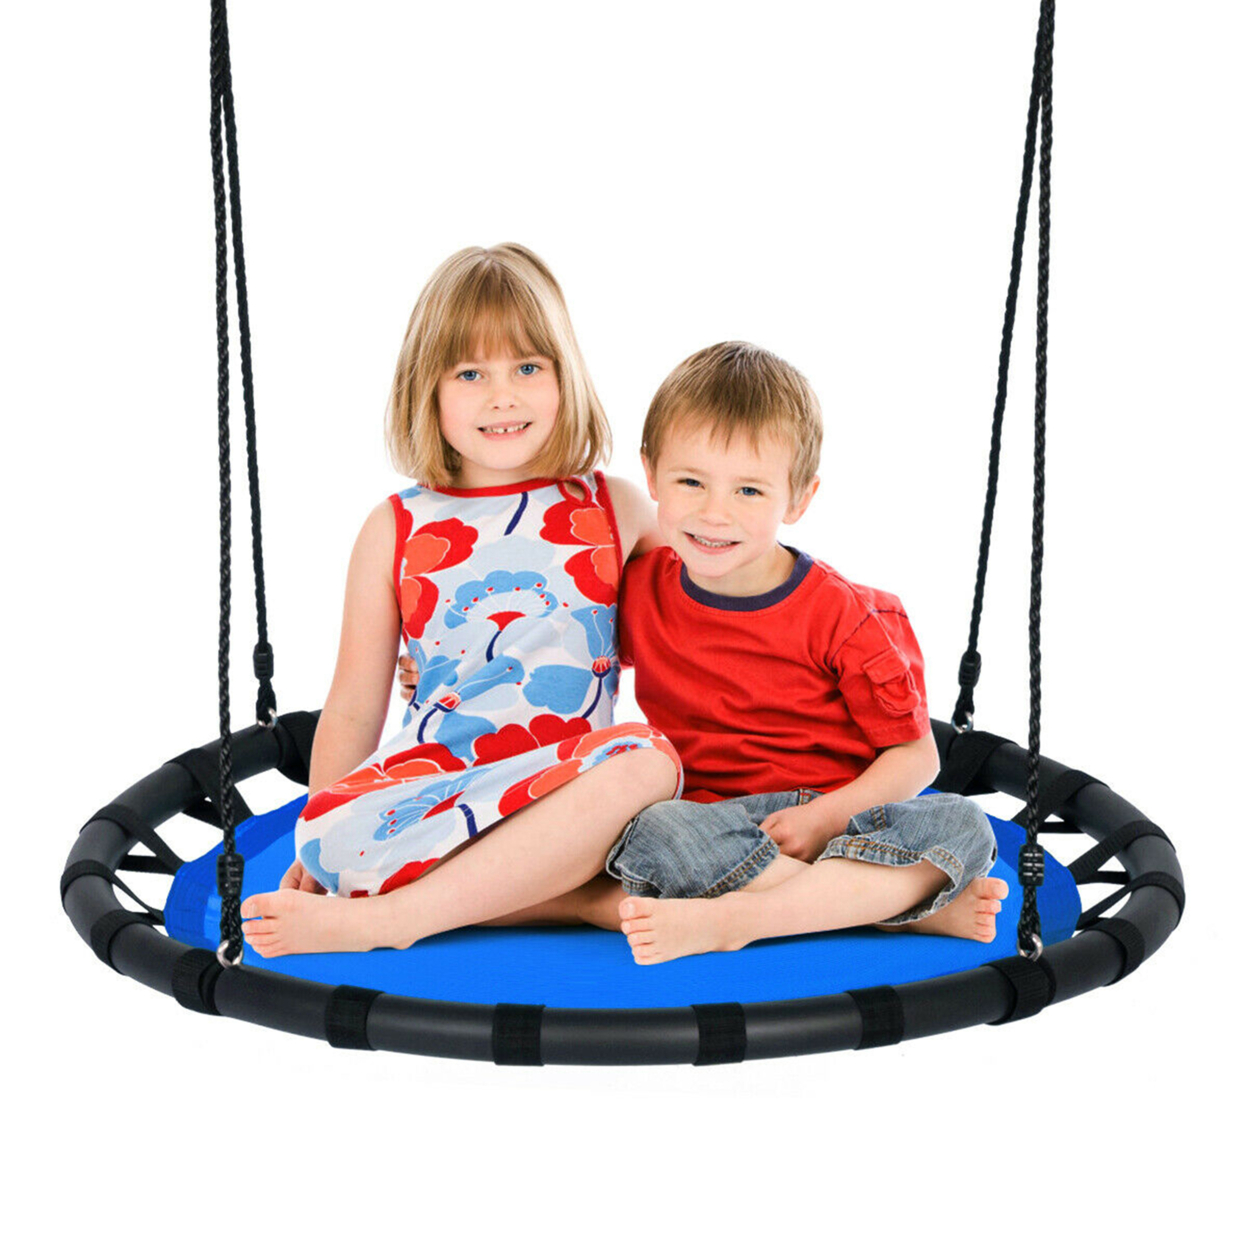 40'' Flying Saucer Round Tree Swing Kids Play Set W/ Adjustable Ropes Outdoor - Blue